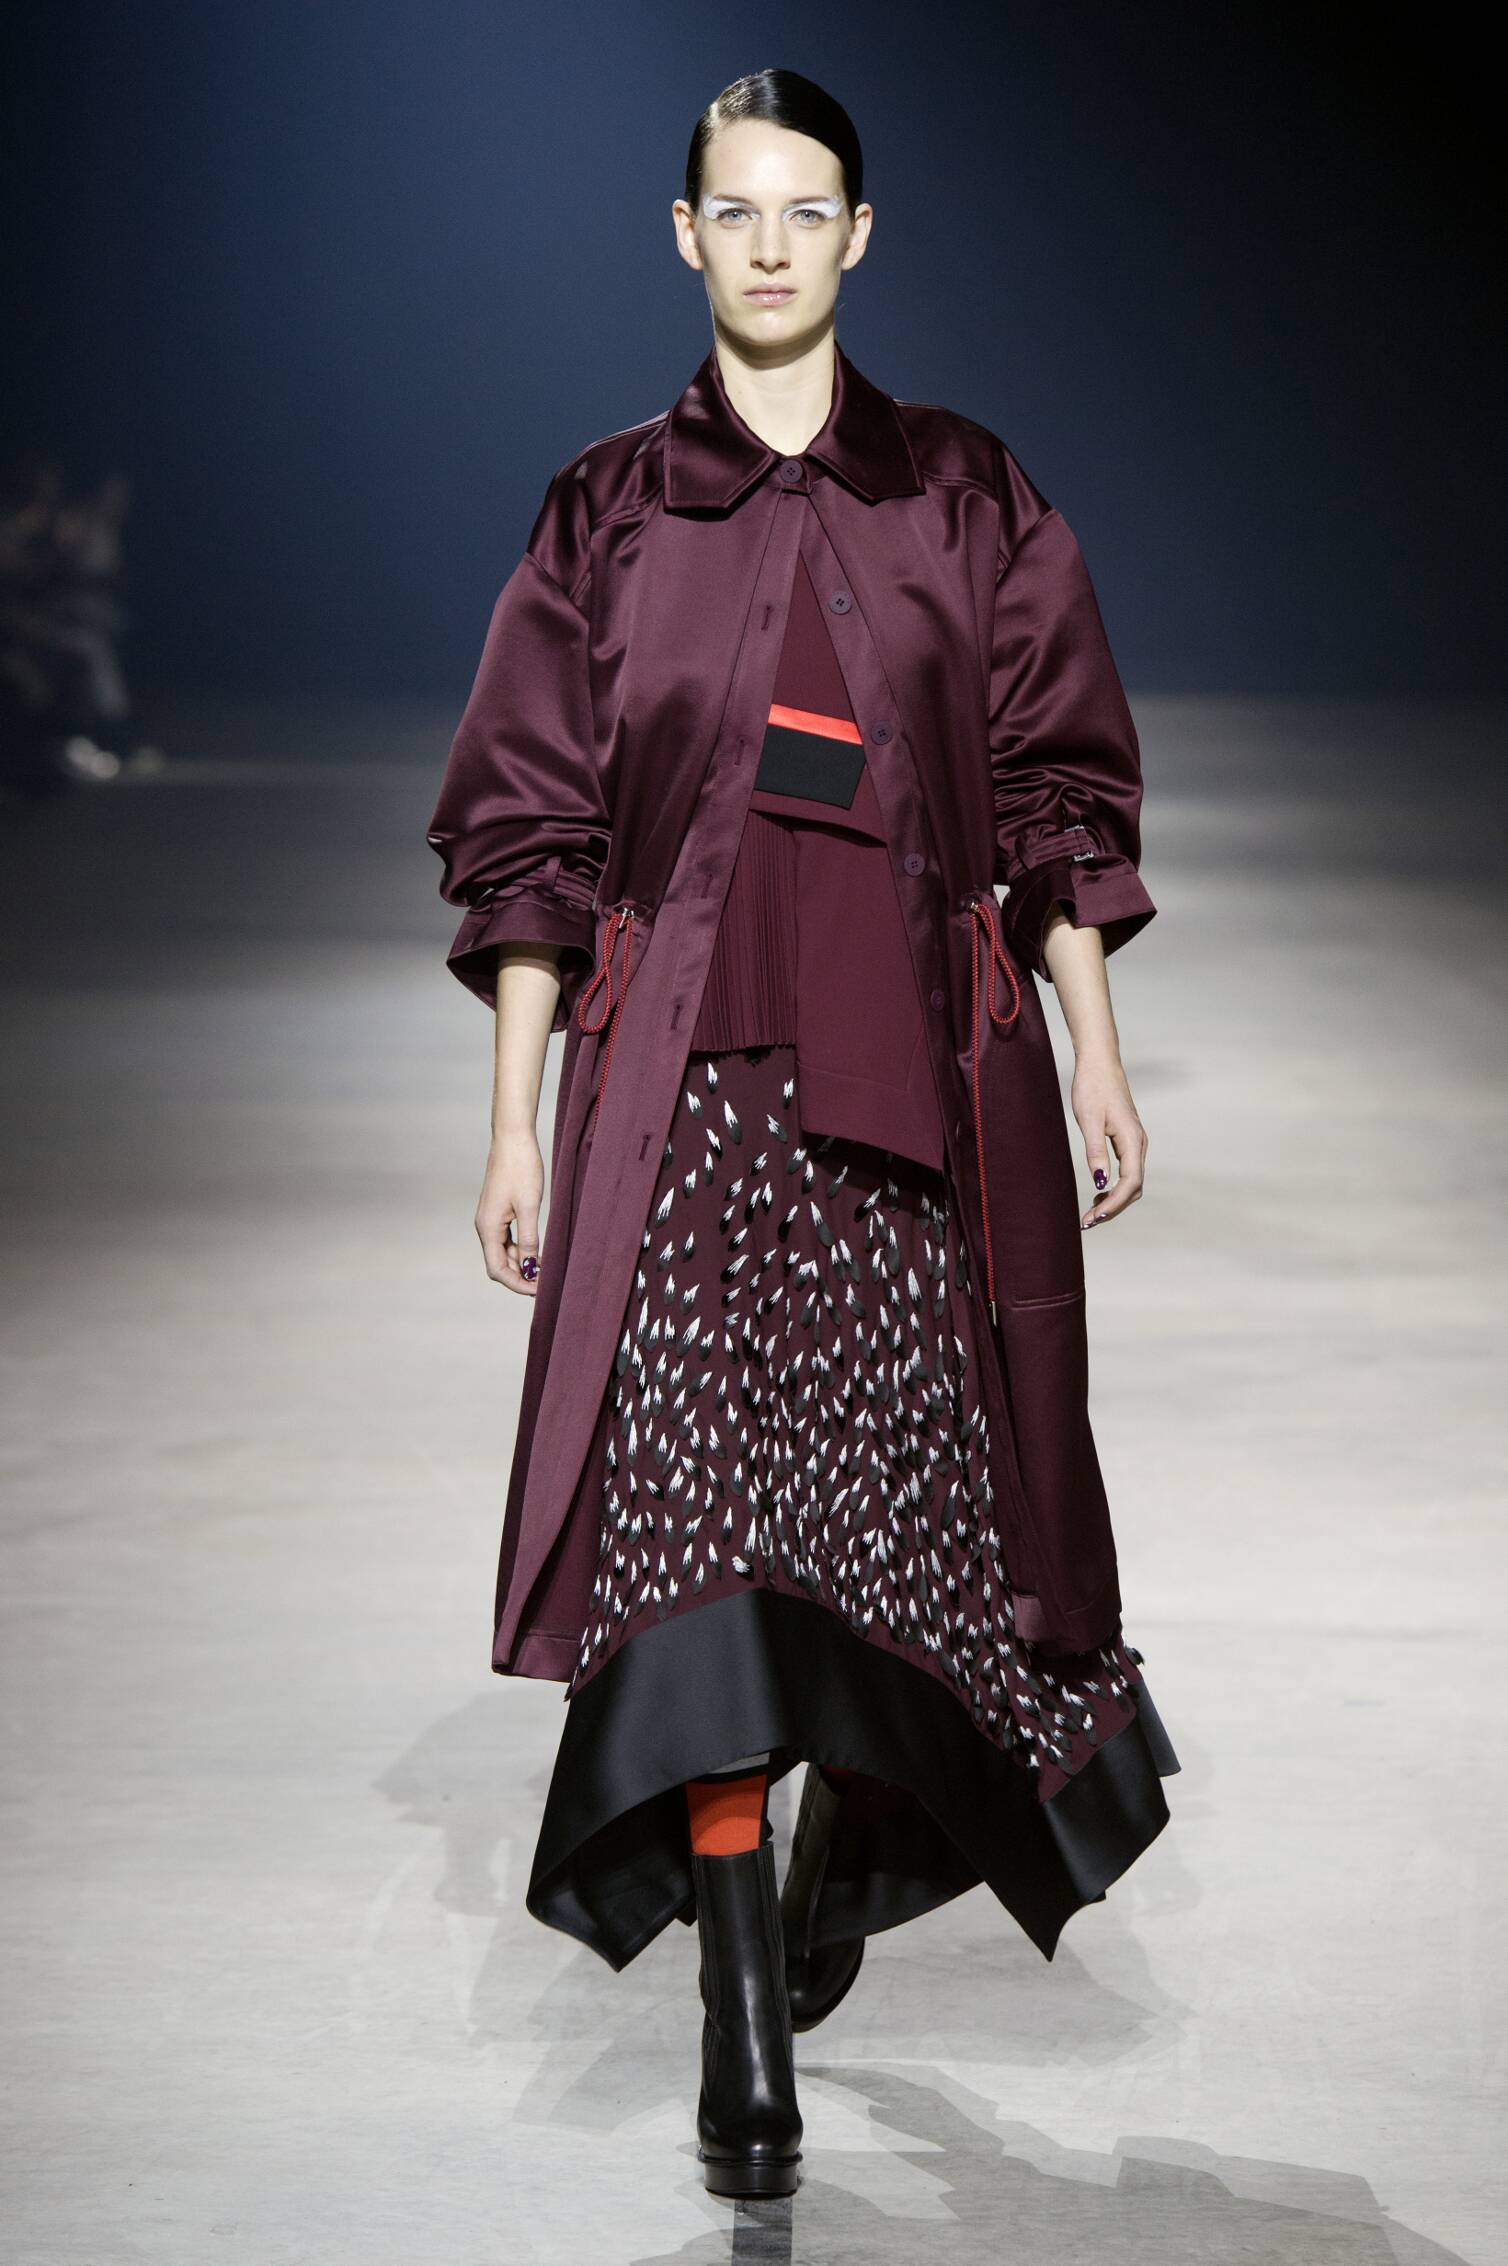 KENZO FALL WINTER 2015-16 WOMEN’S COLLECTION | The Skinny Beep